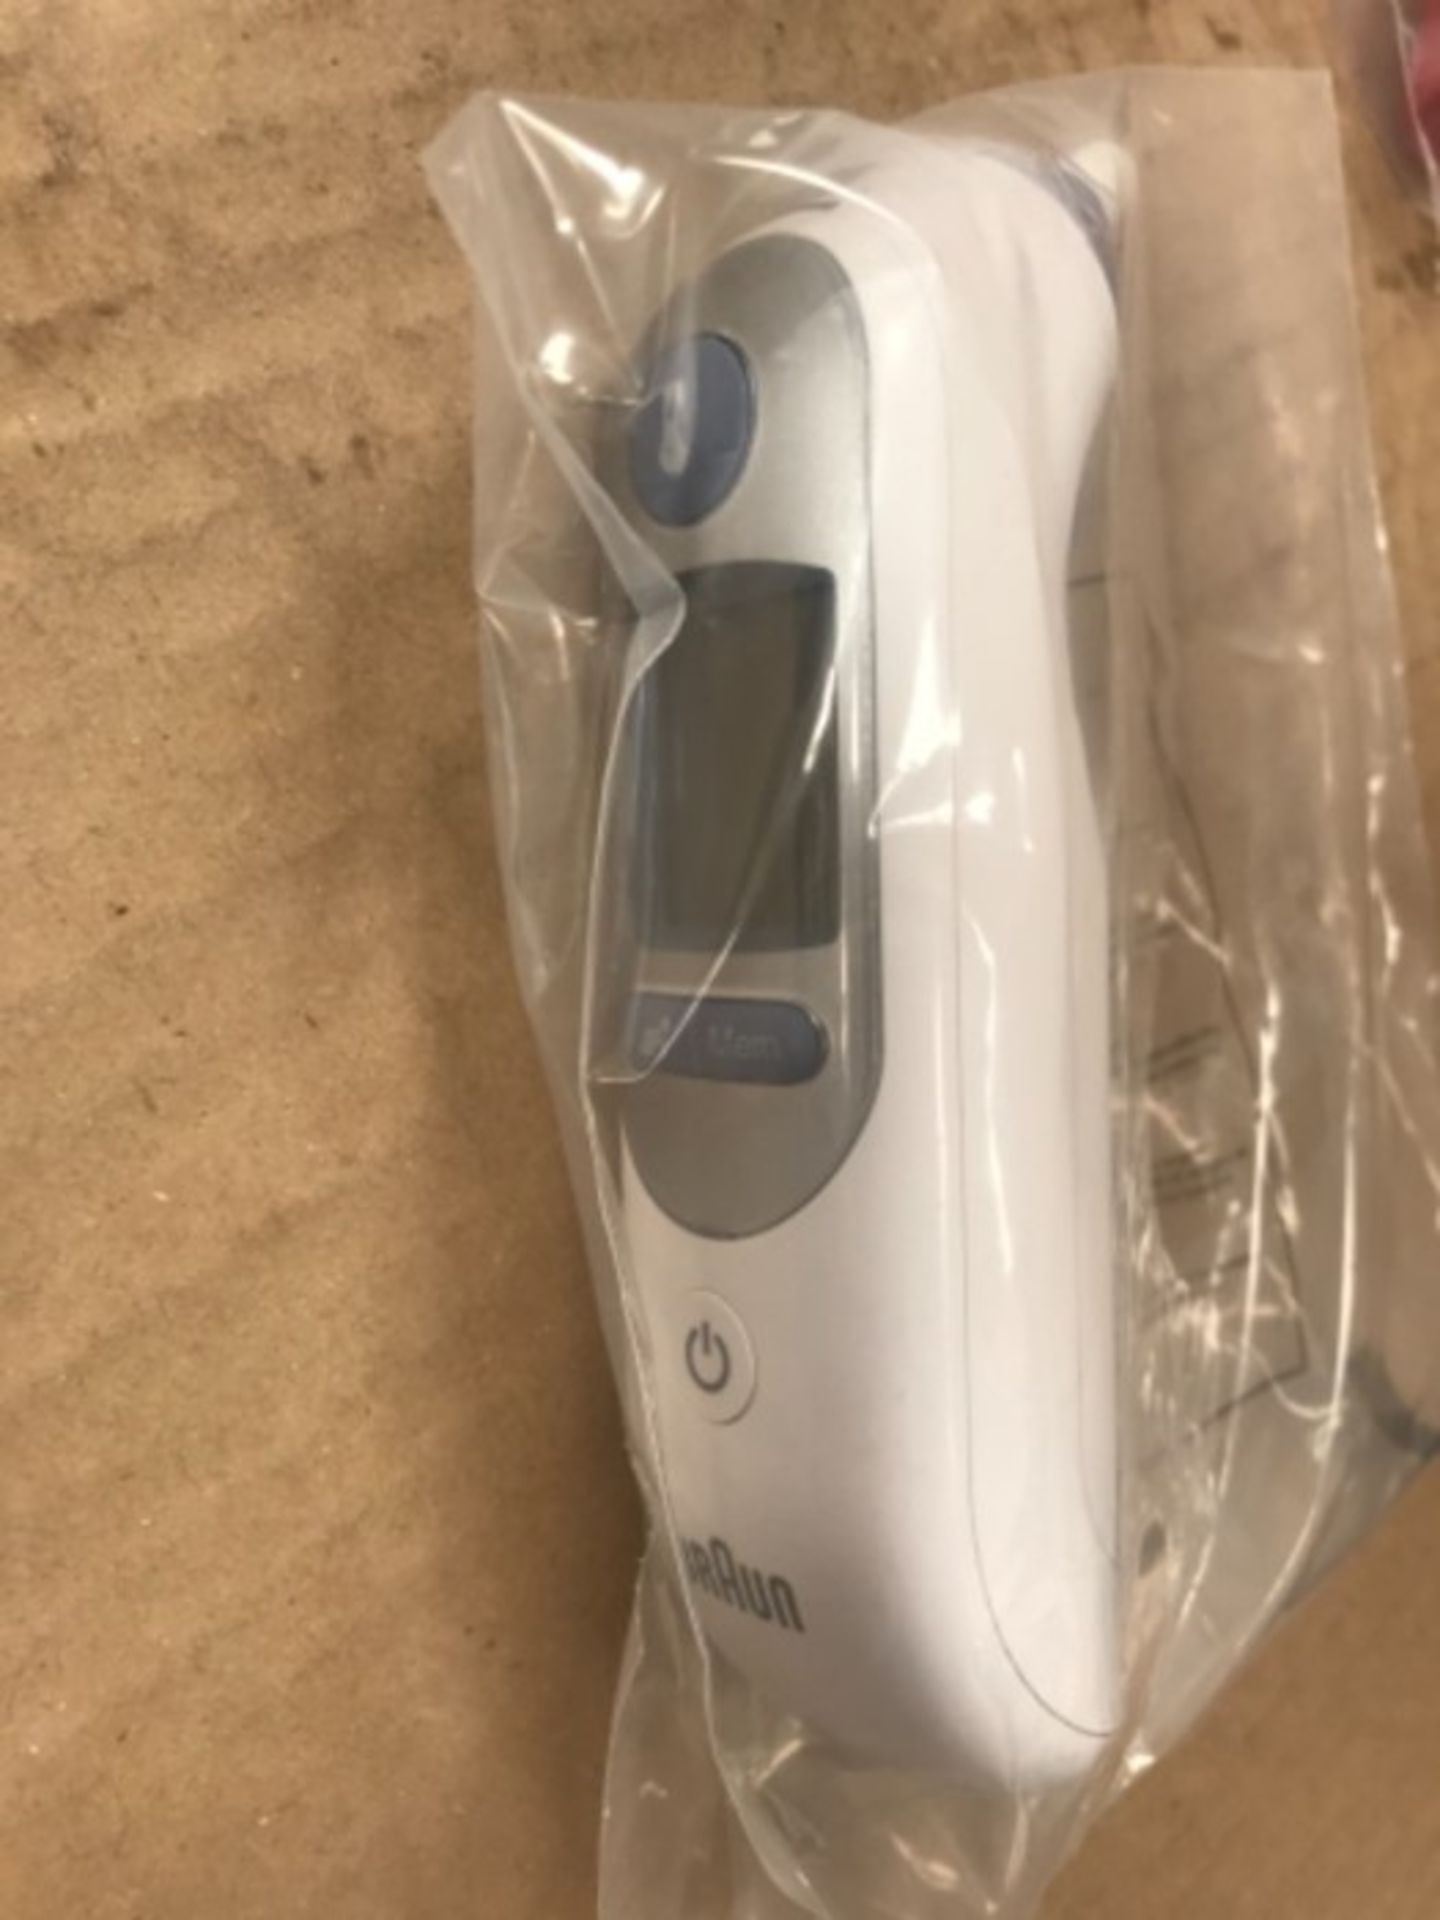 Braun Thermoscan 7 IRT6520 Thermometer - Image 2 of 2